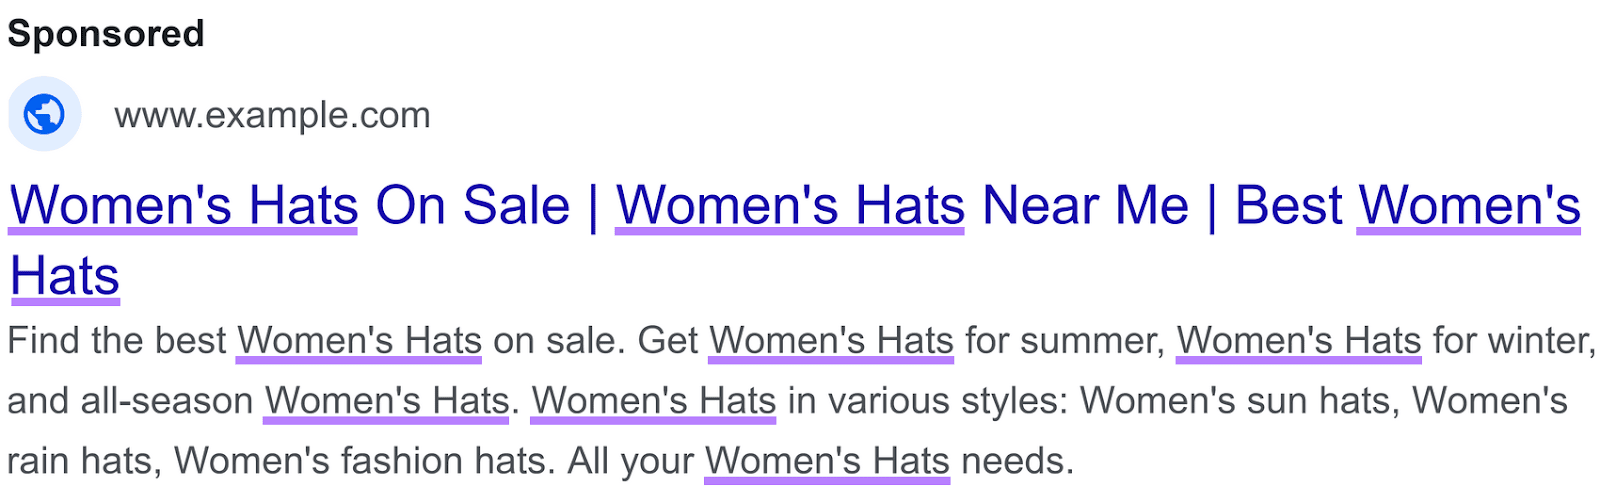 A PPC ad mockup for "women's hats" showing keyword stuffing